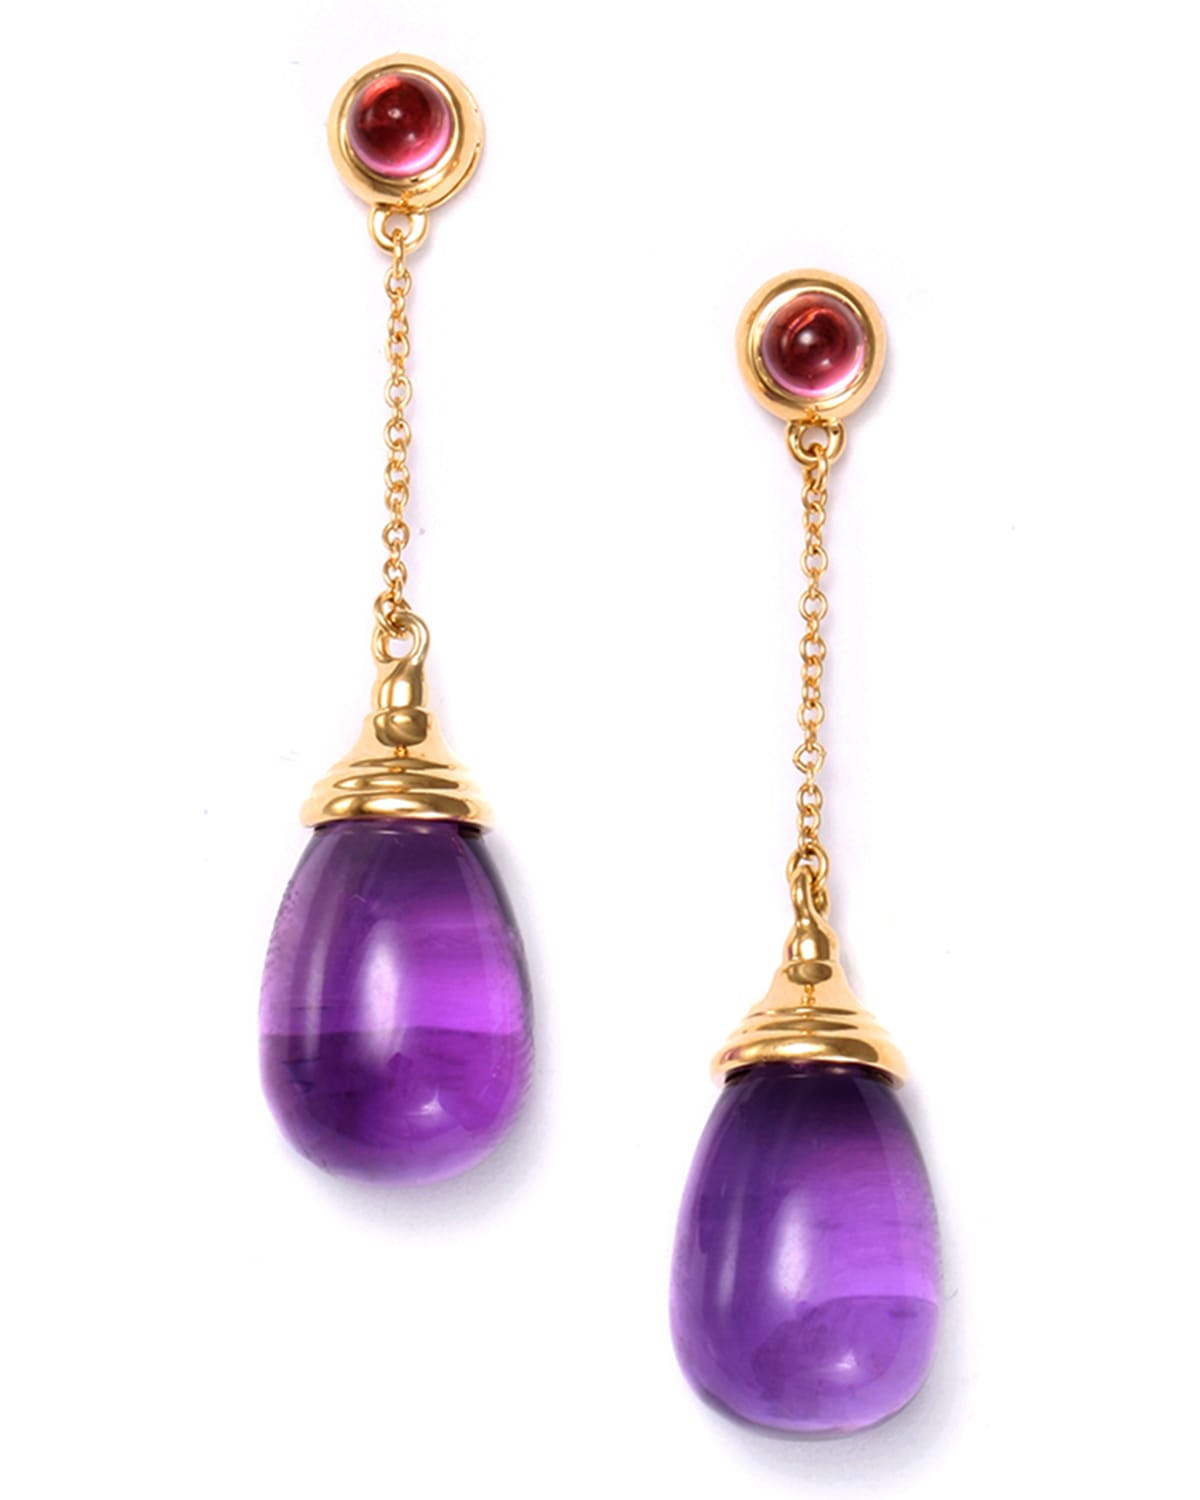 Syna 18k Black Onyx Drop Chain Earrings with Rubellite | Neiman Marcus